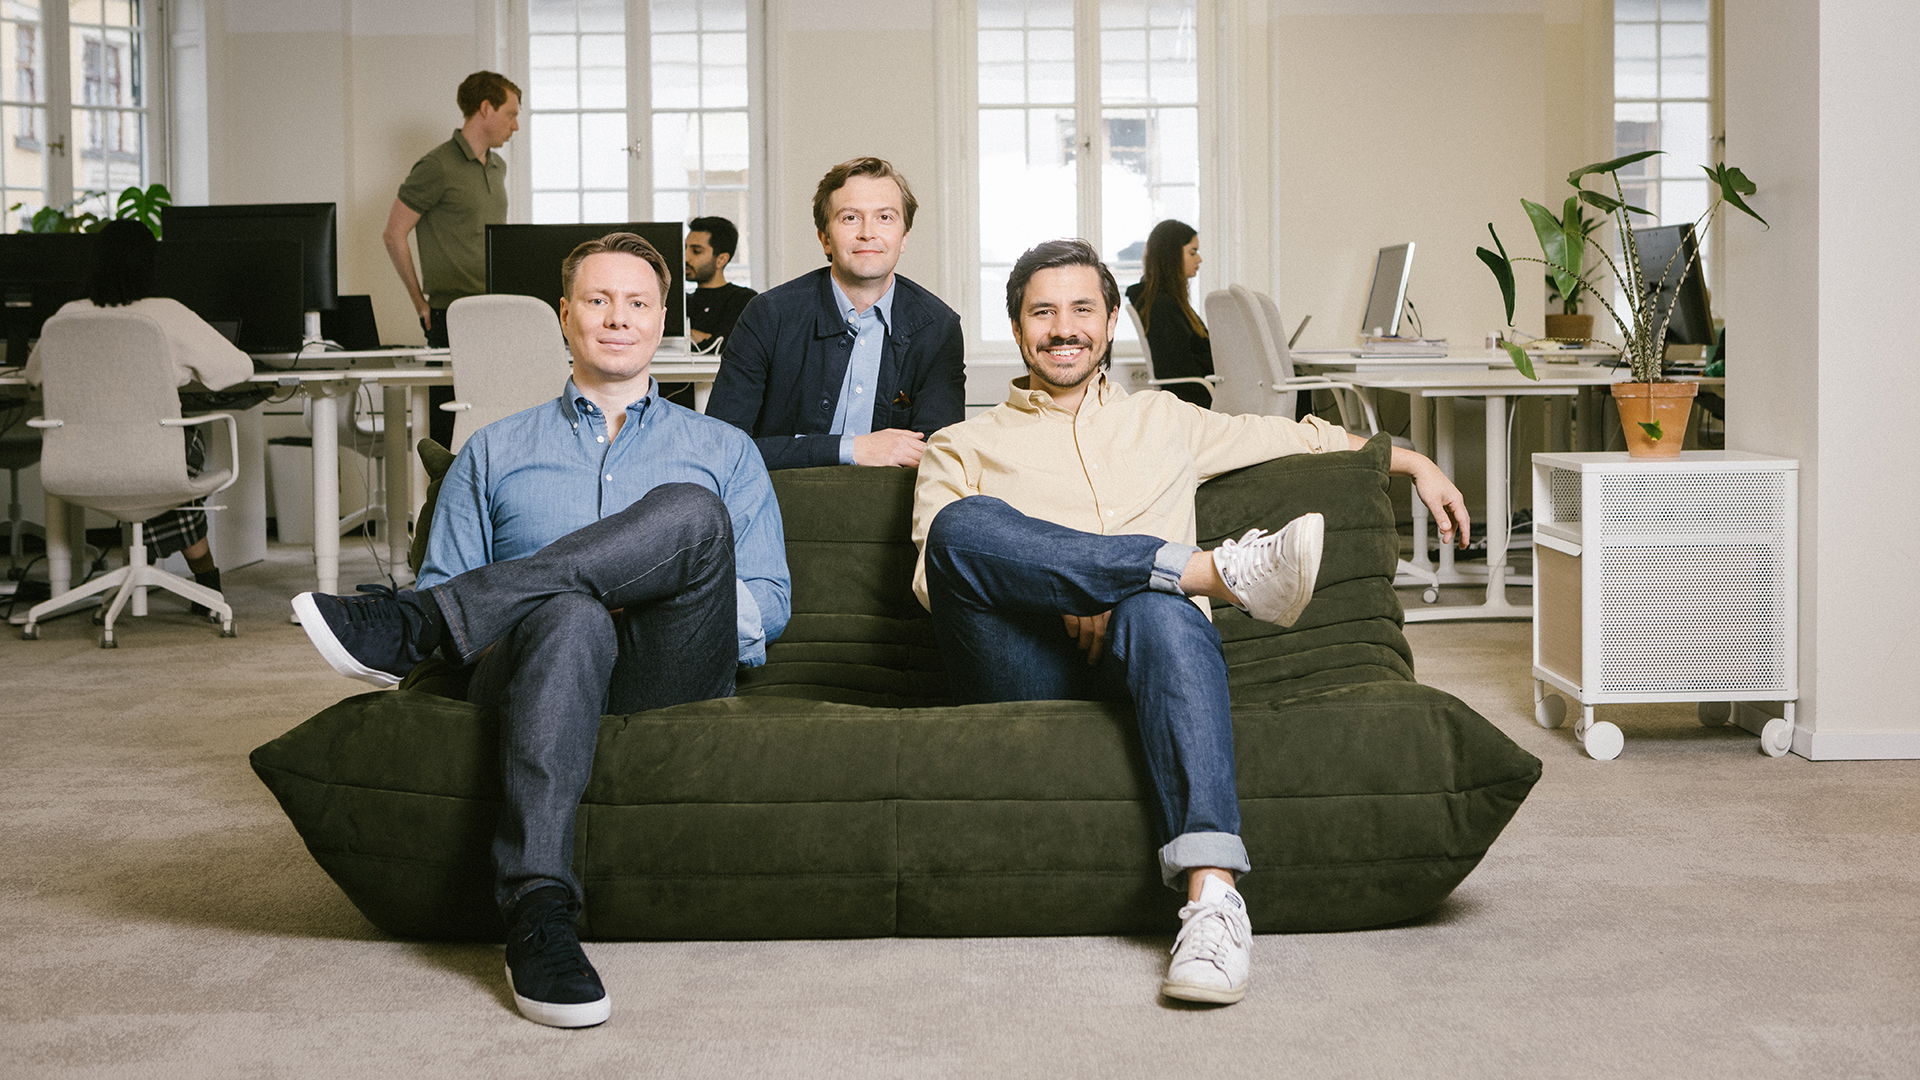 Anyfin startup funding will help its Europe expansion plan